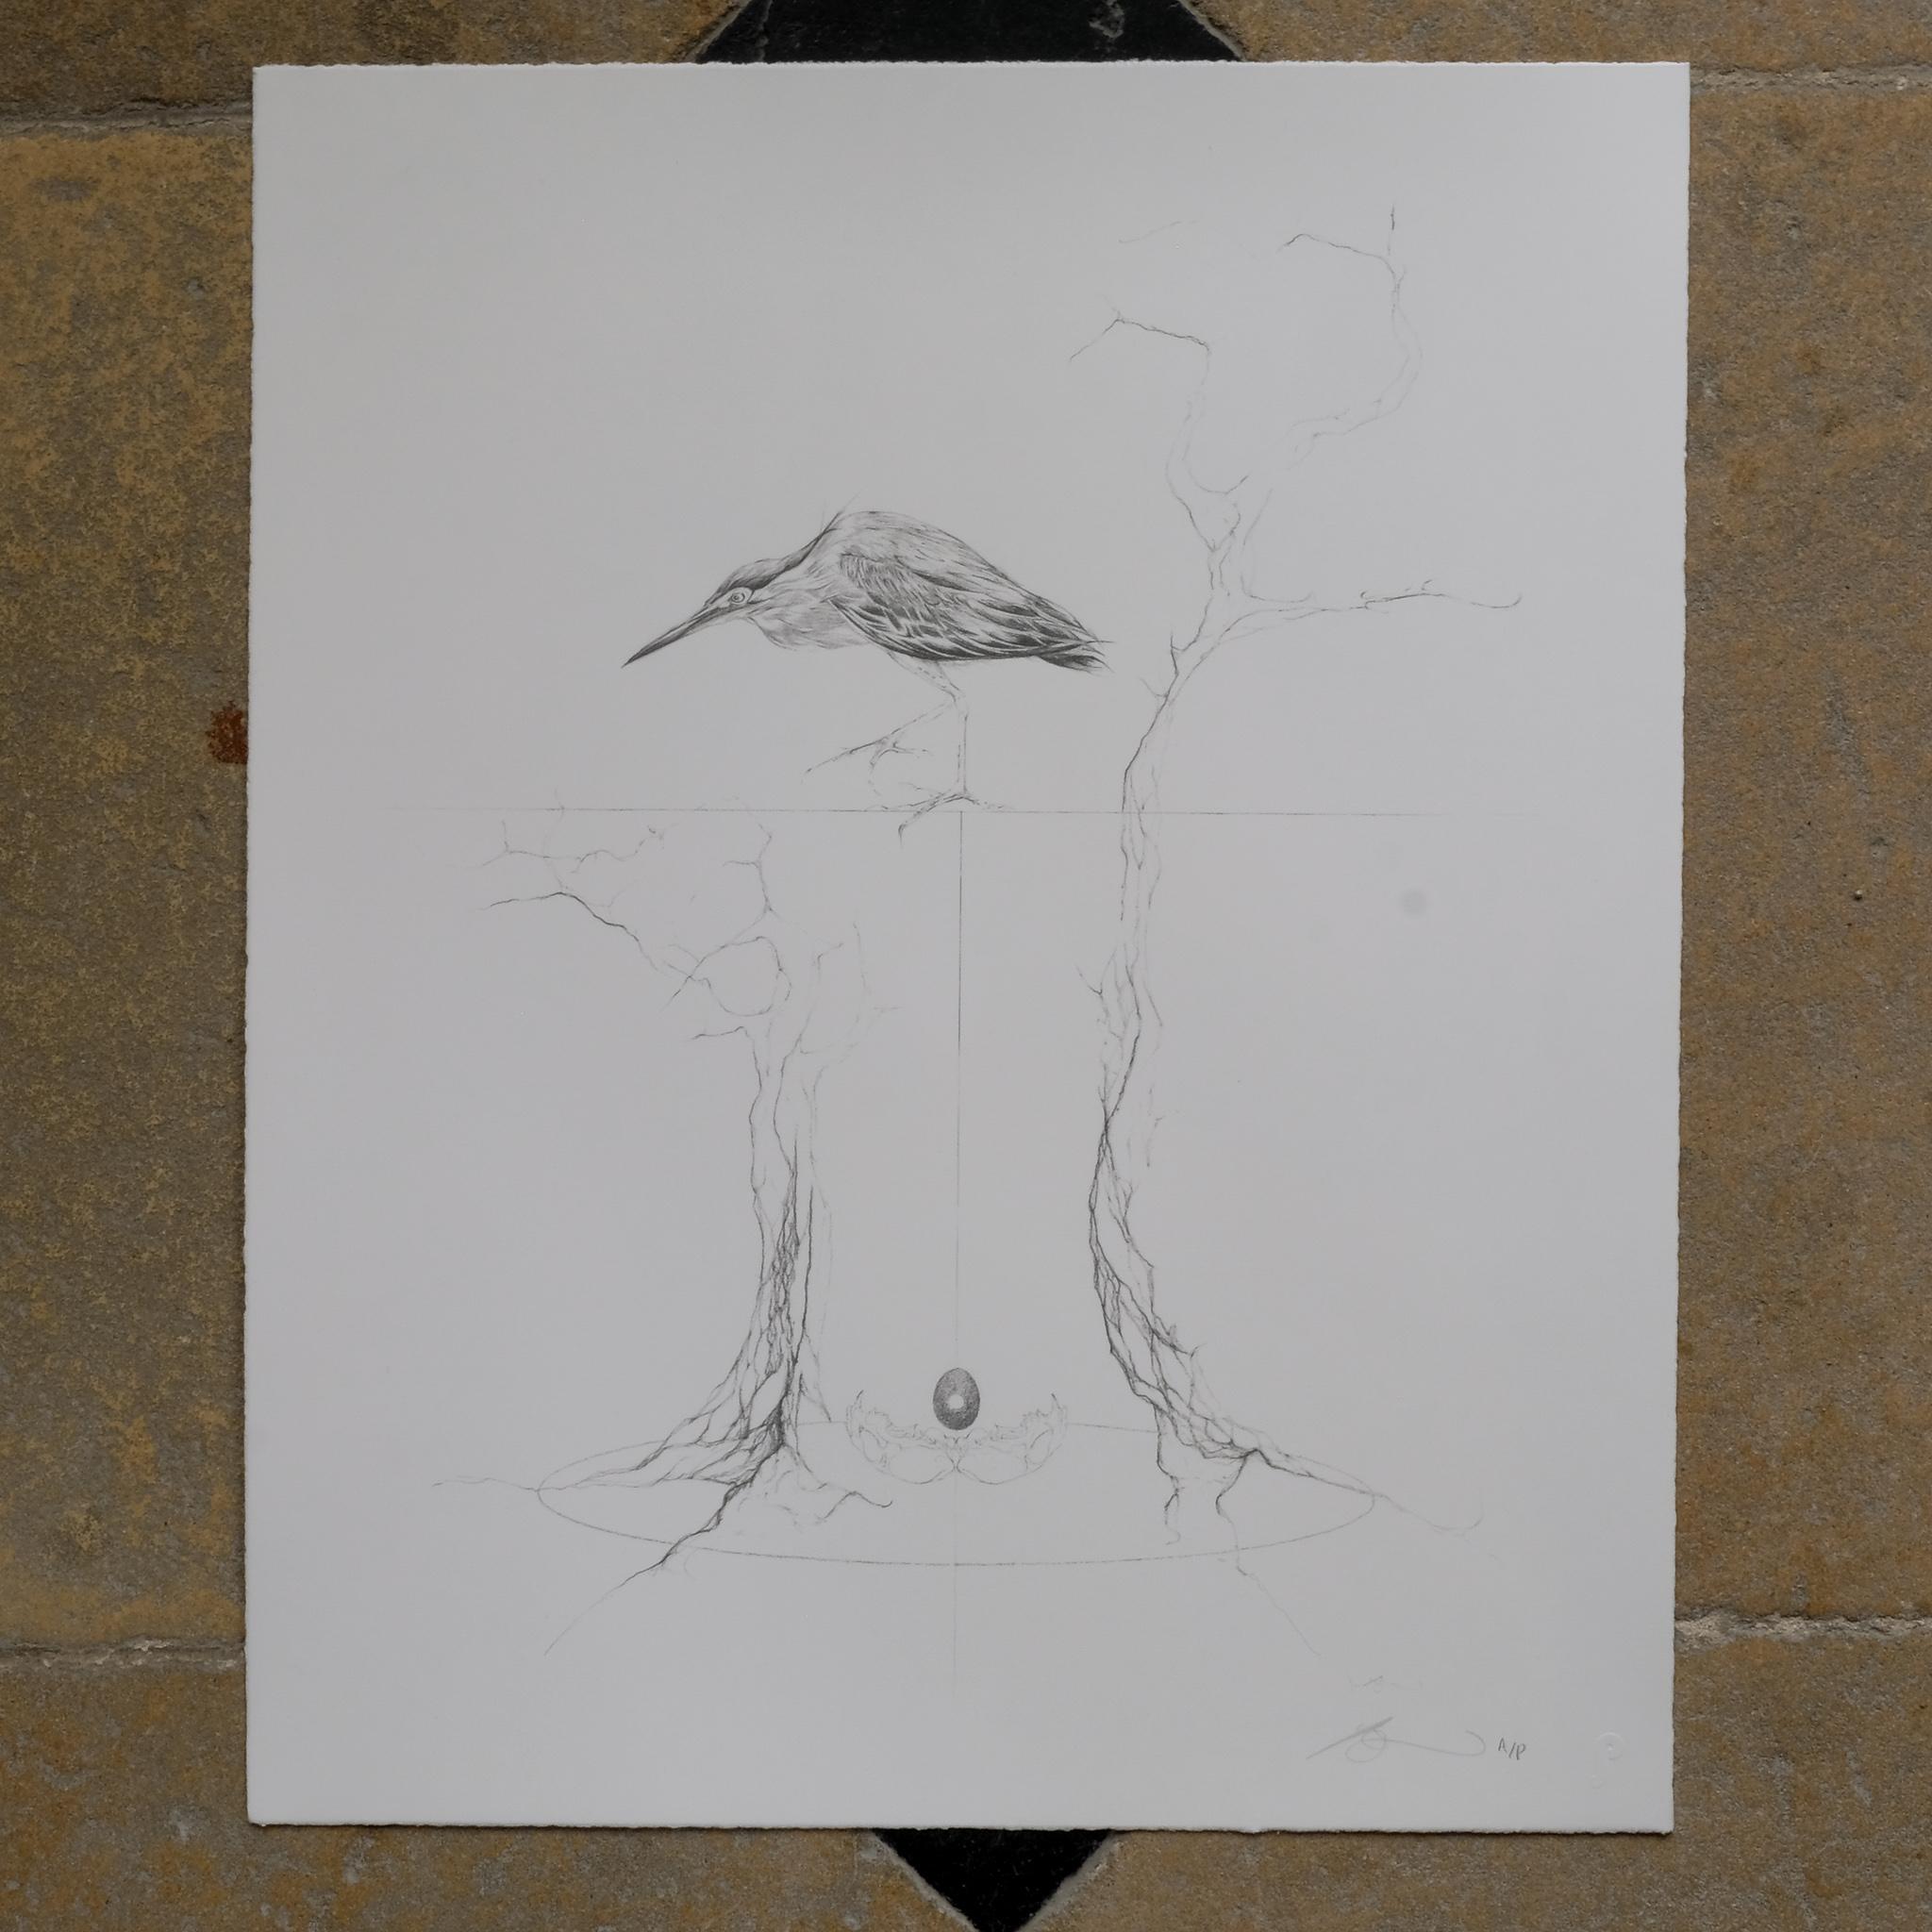 Screenprint, 2011, on Somerset Satin 300gsm paper, signed in pencil, inscribed ‘A/P’ (an artist’s proof aside from the edition of 125), from the portfolio Ghosts of Gone Birds, printed and published by Jealous, London, the full sheet, with a deckle